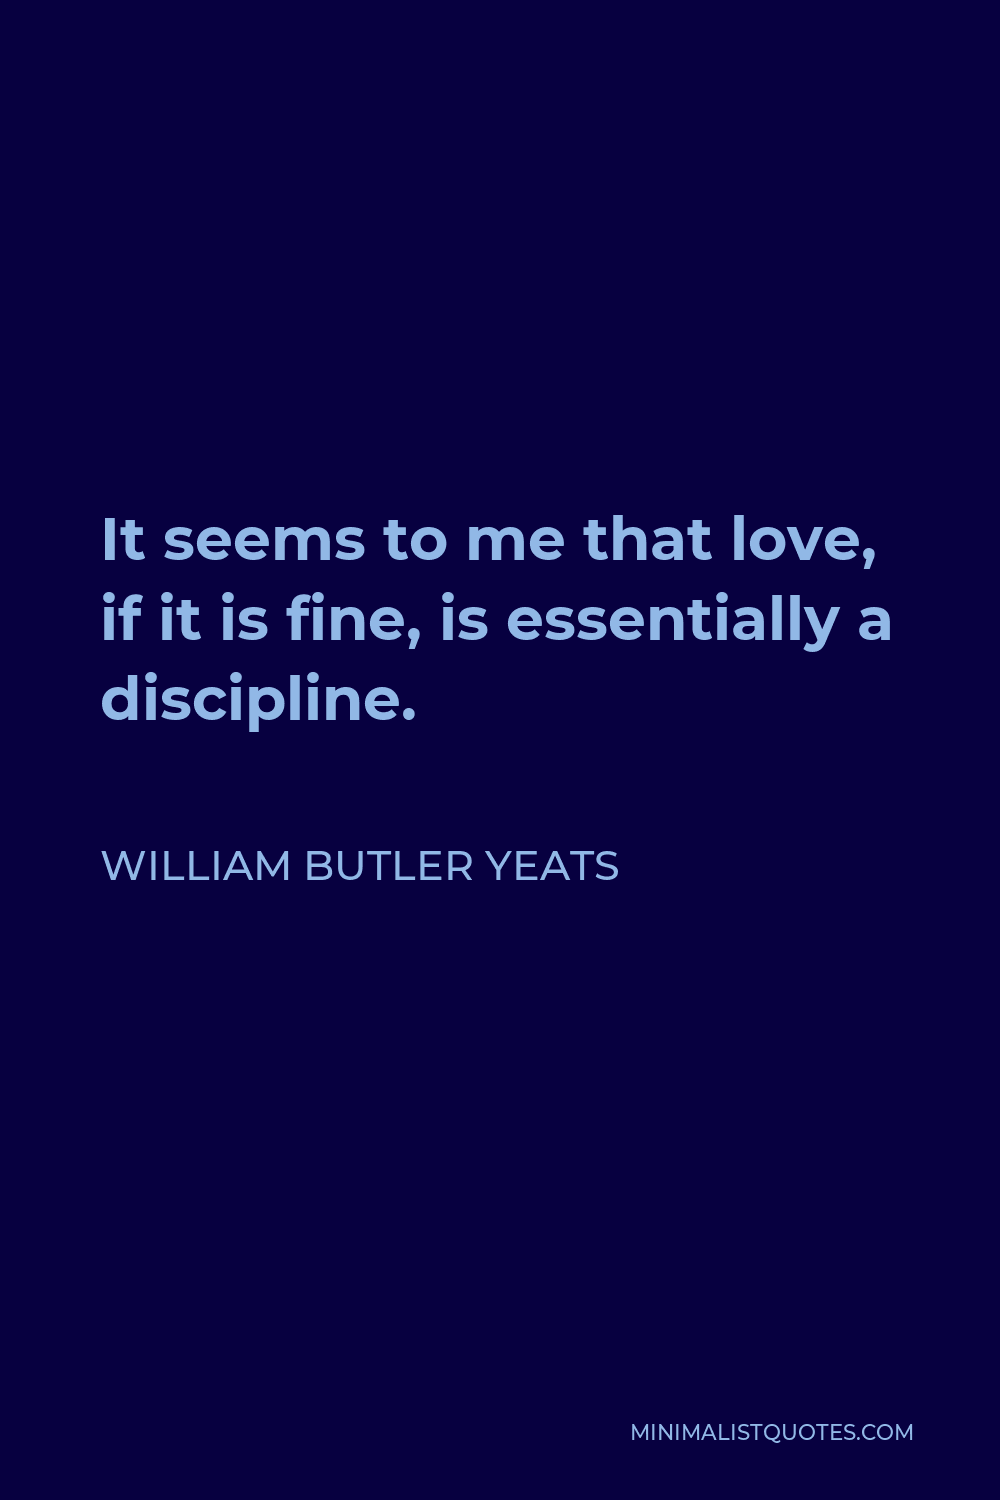 William Butler Yeats Quote - It seems to me that love, if it is fine, is essentially a discipline.